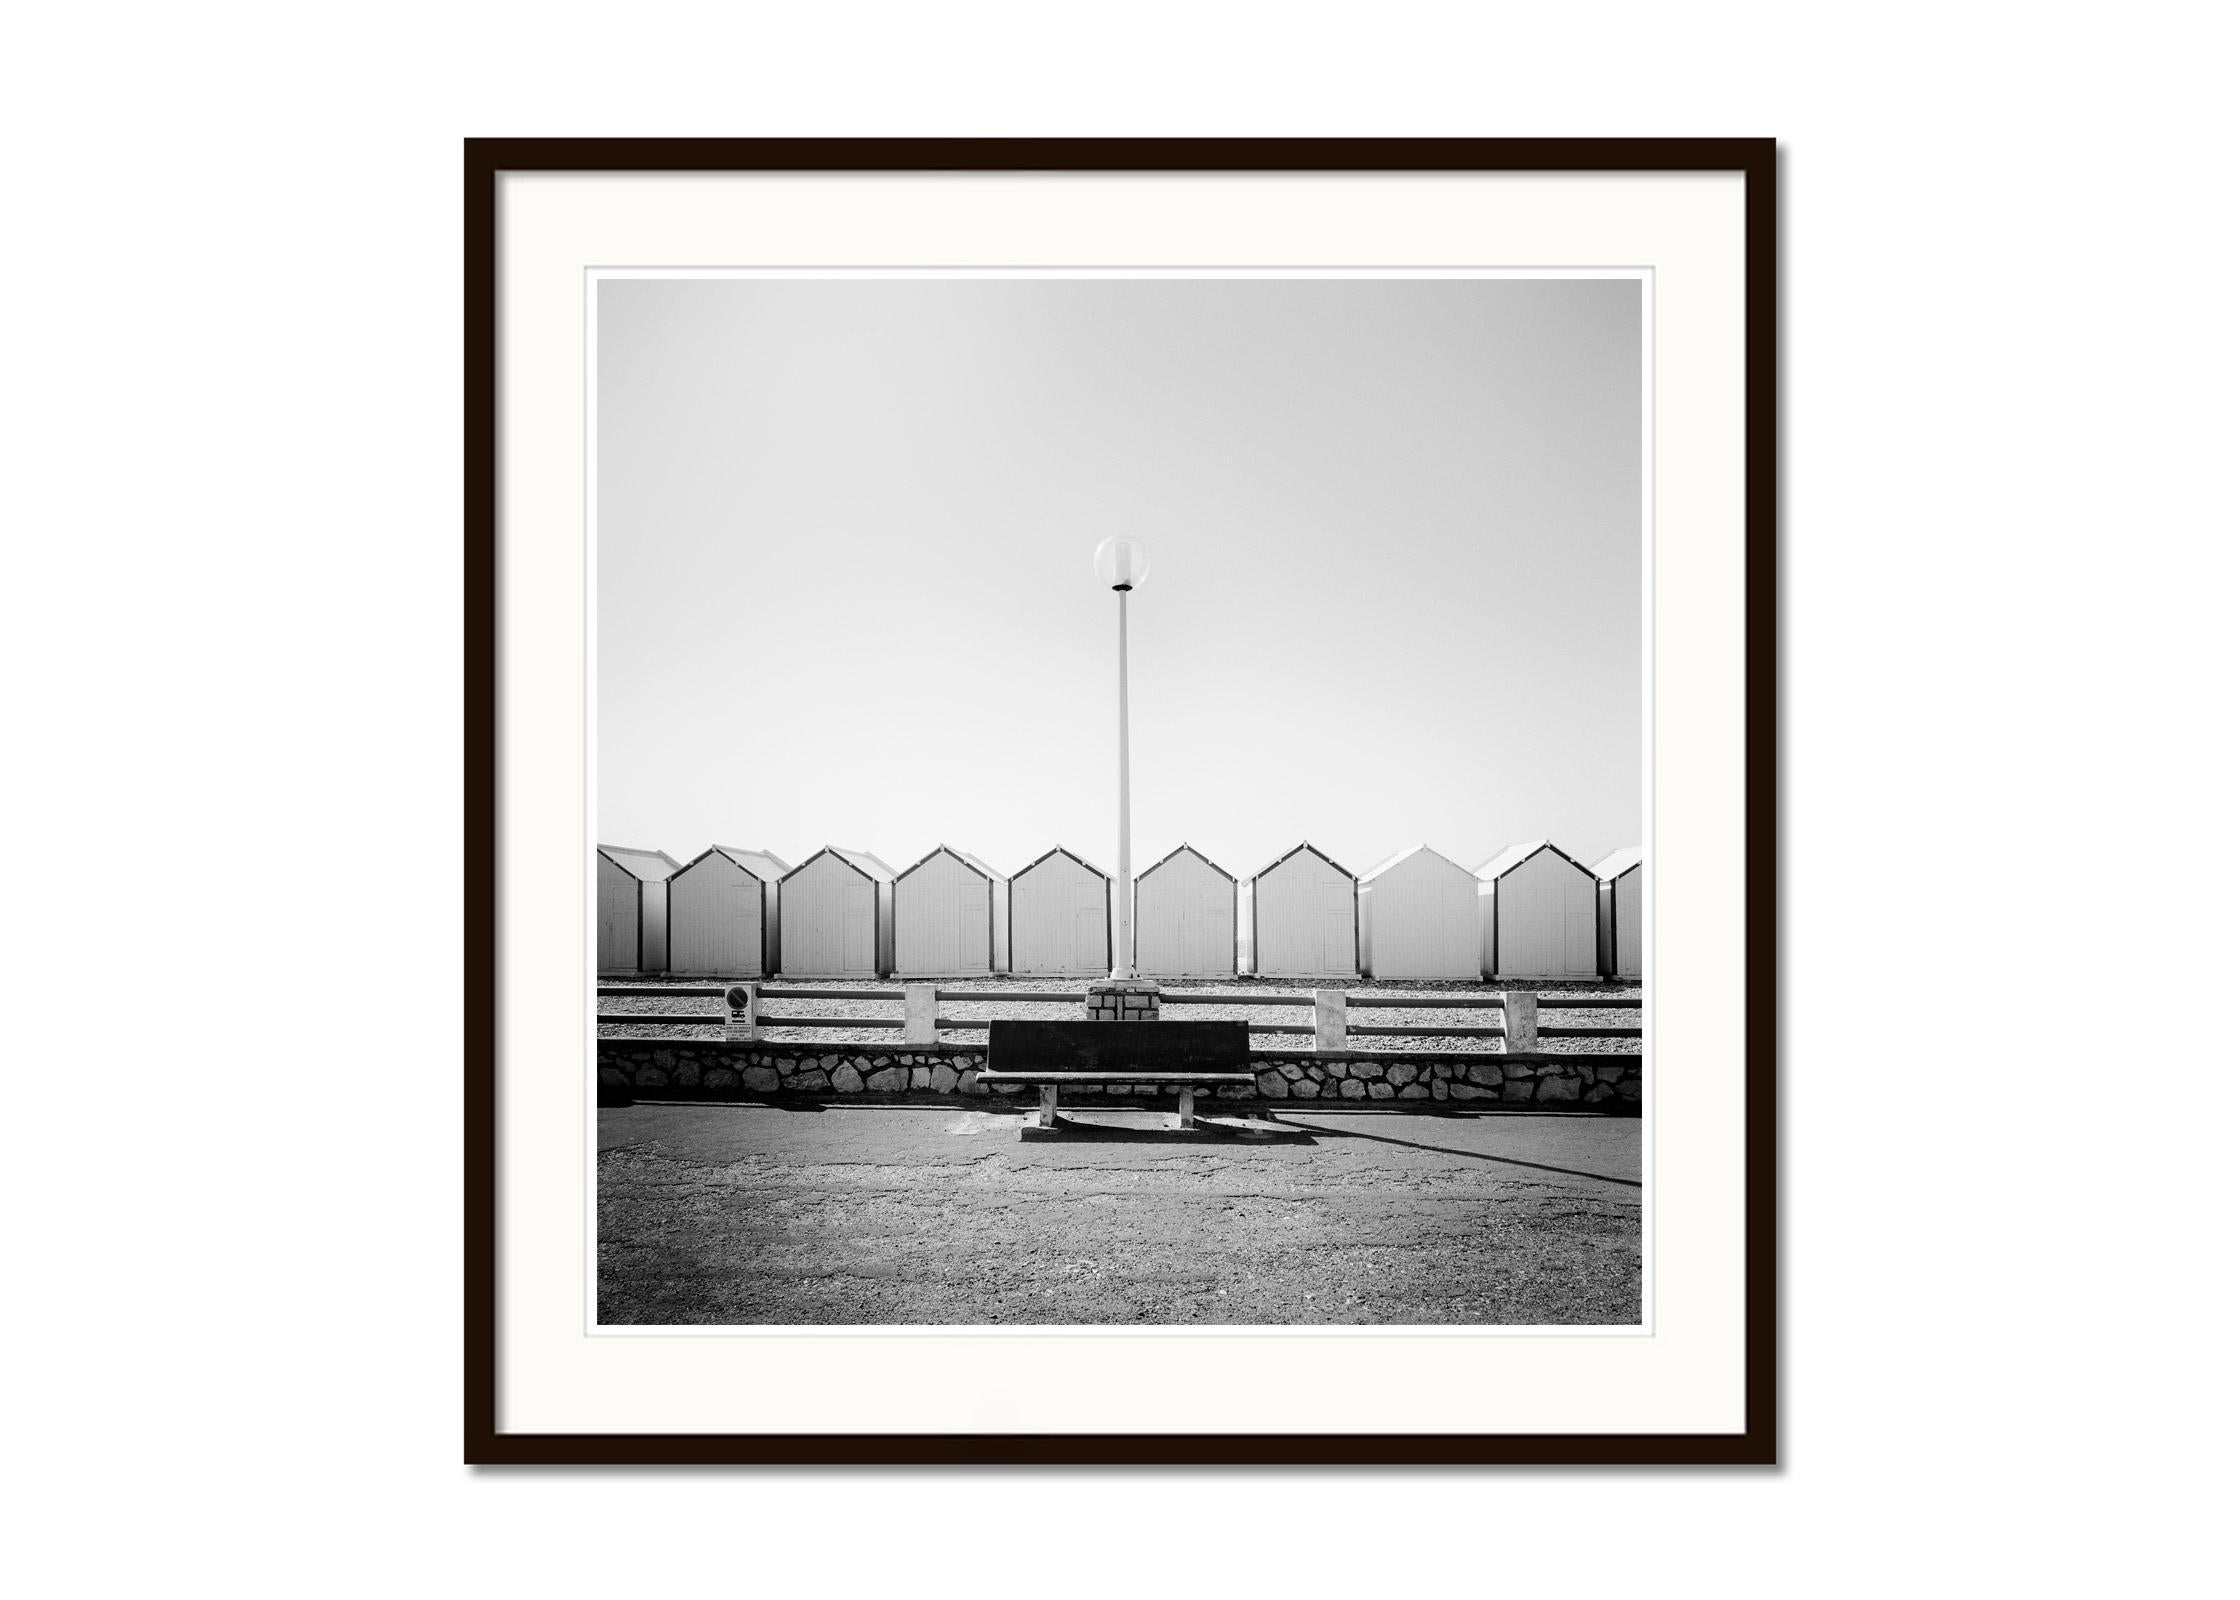 Bench on the Promenade beach huts France black white landscape art photography - Contemporary Photograph by Gerald Berghammer